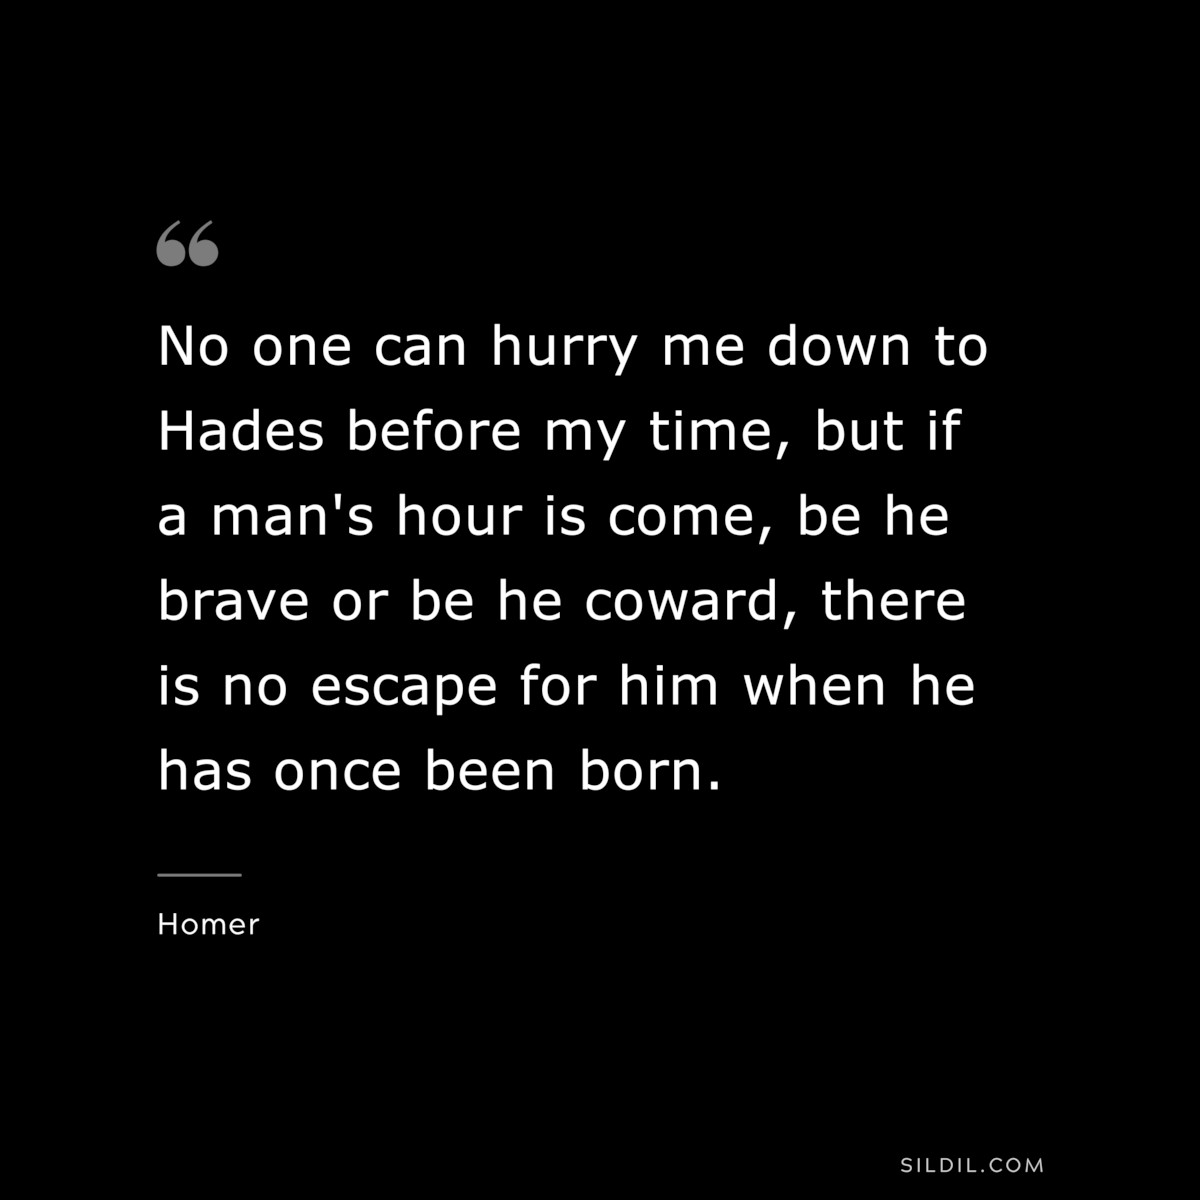 No one can hurry me down to Hades before my time, but if a man's hour is come, be he brave or be he coward, there is no escape for him when he has once been born. ― Homer